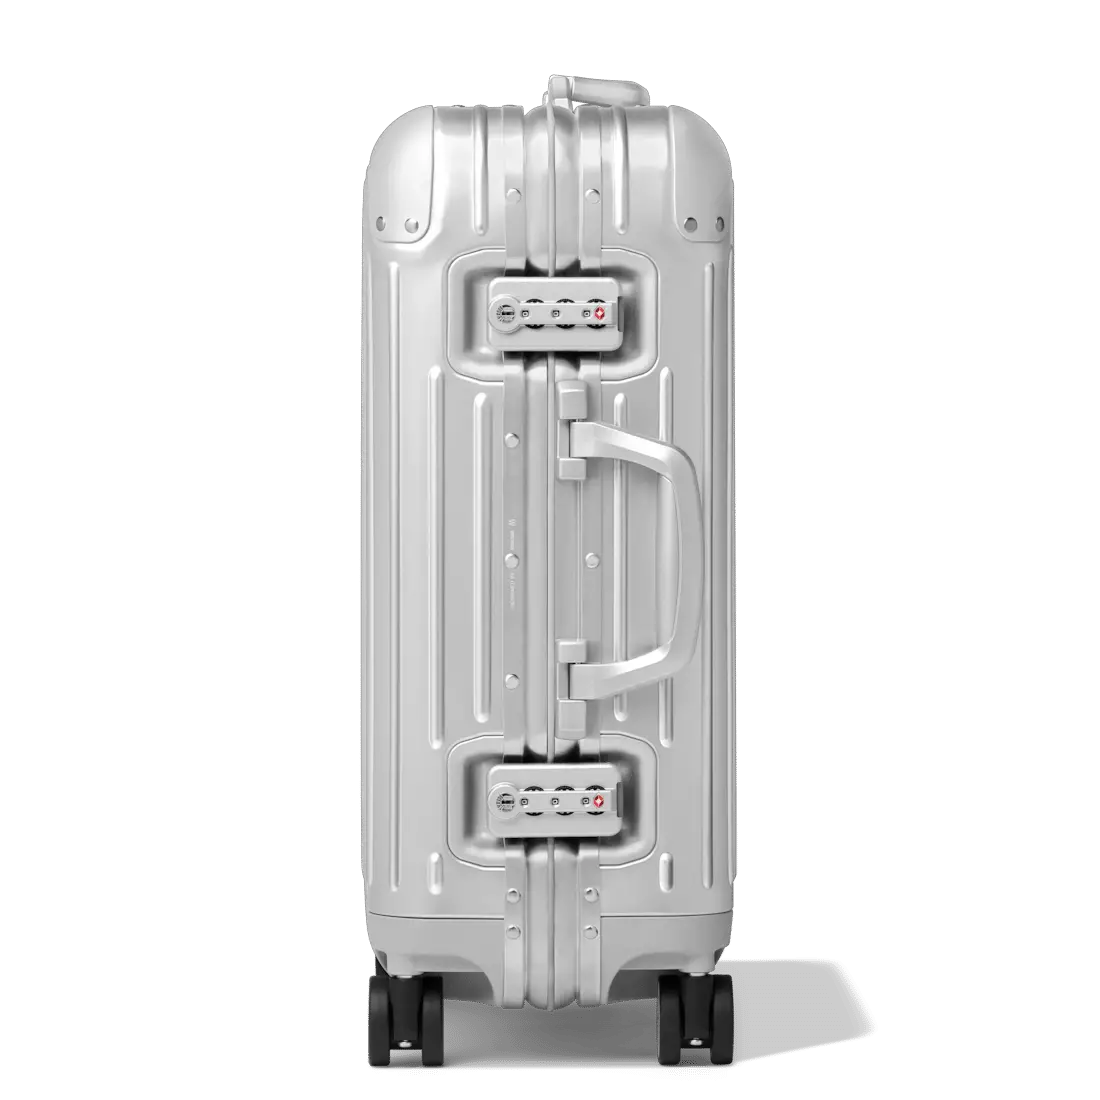 The Rimowa Cabin S: Reviewing a Contemporary Classic